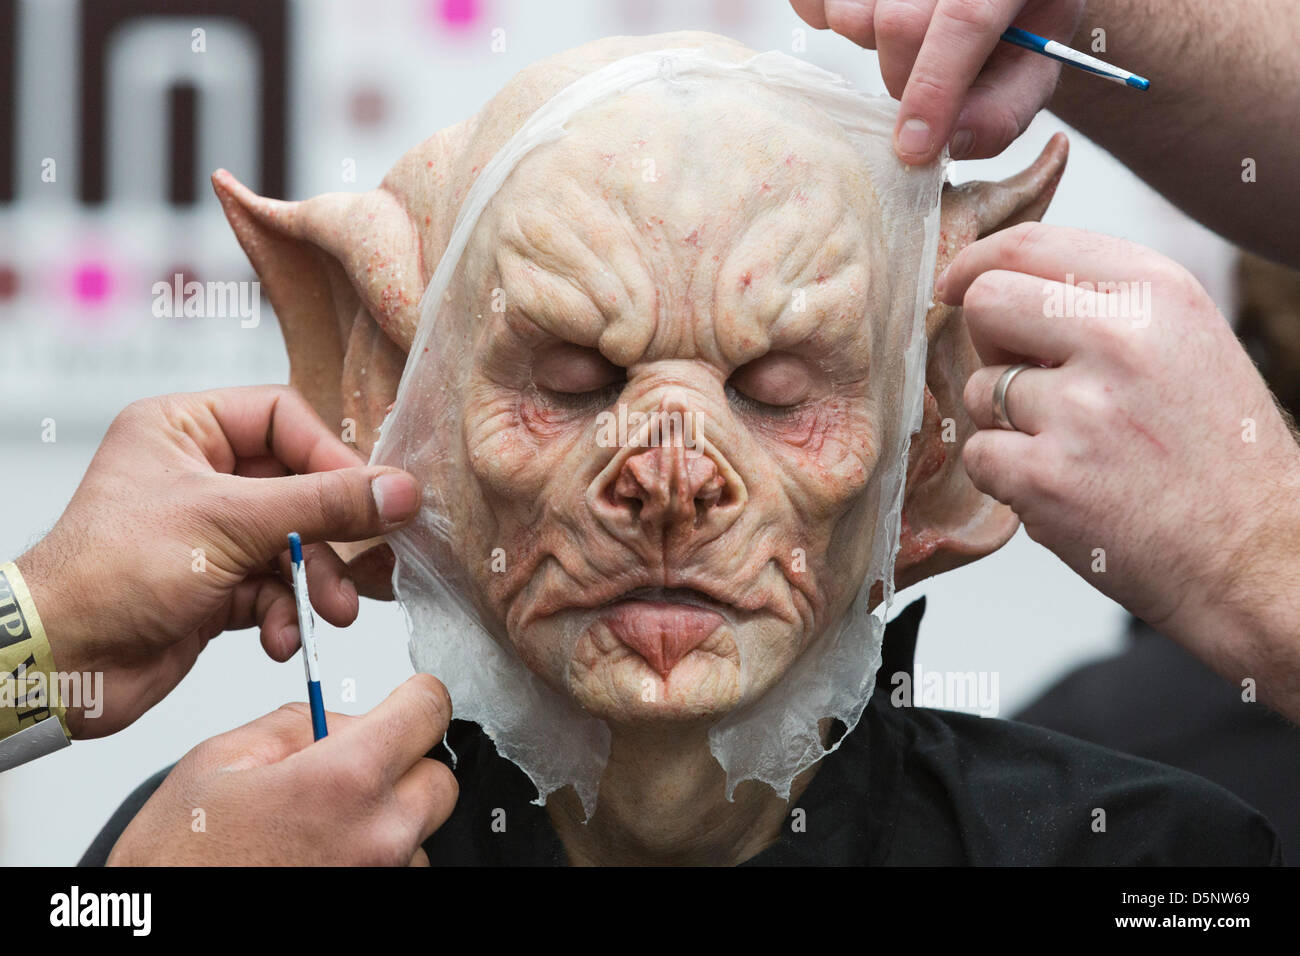 London, UK. 6th April 2013. Picture: Paul Warren, 38, creature performer receives a special effects makeover. UMA 2013, United Makeup Artists Expo takes place at the Business Design Centre in Islington, North London. At this European event created by Chris McGowan, leading professionals provide demonstrations and the latest techniques and products are showcased. Photo: Nick Savage/Alamy Live News Stock Photo